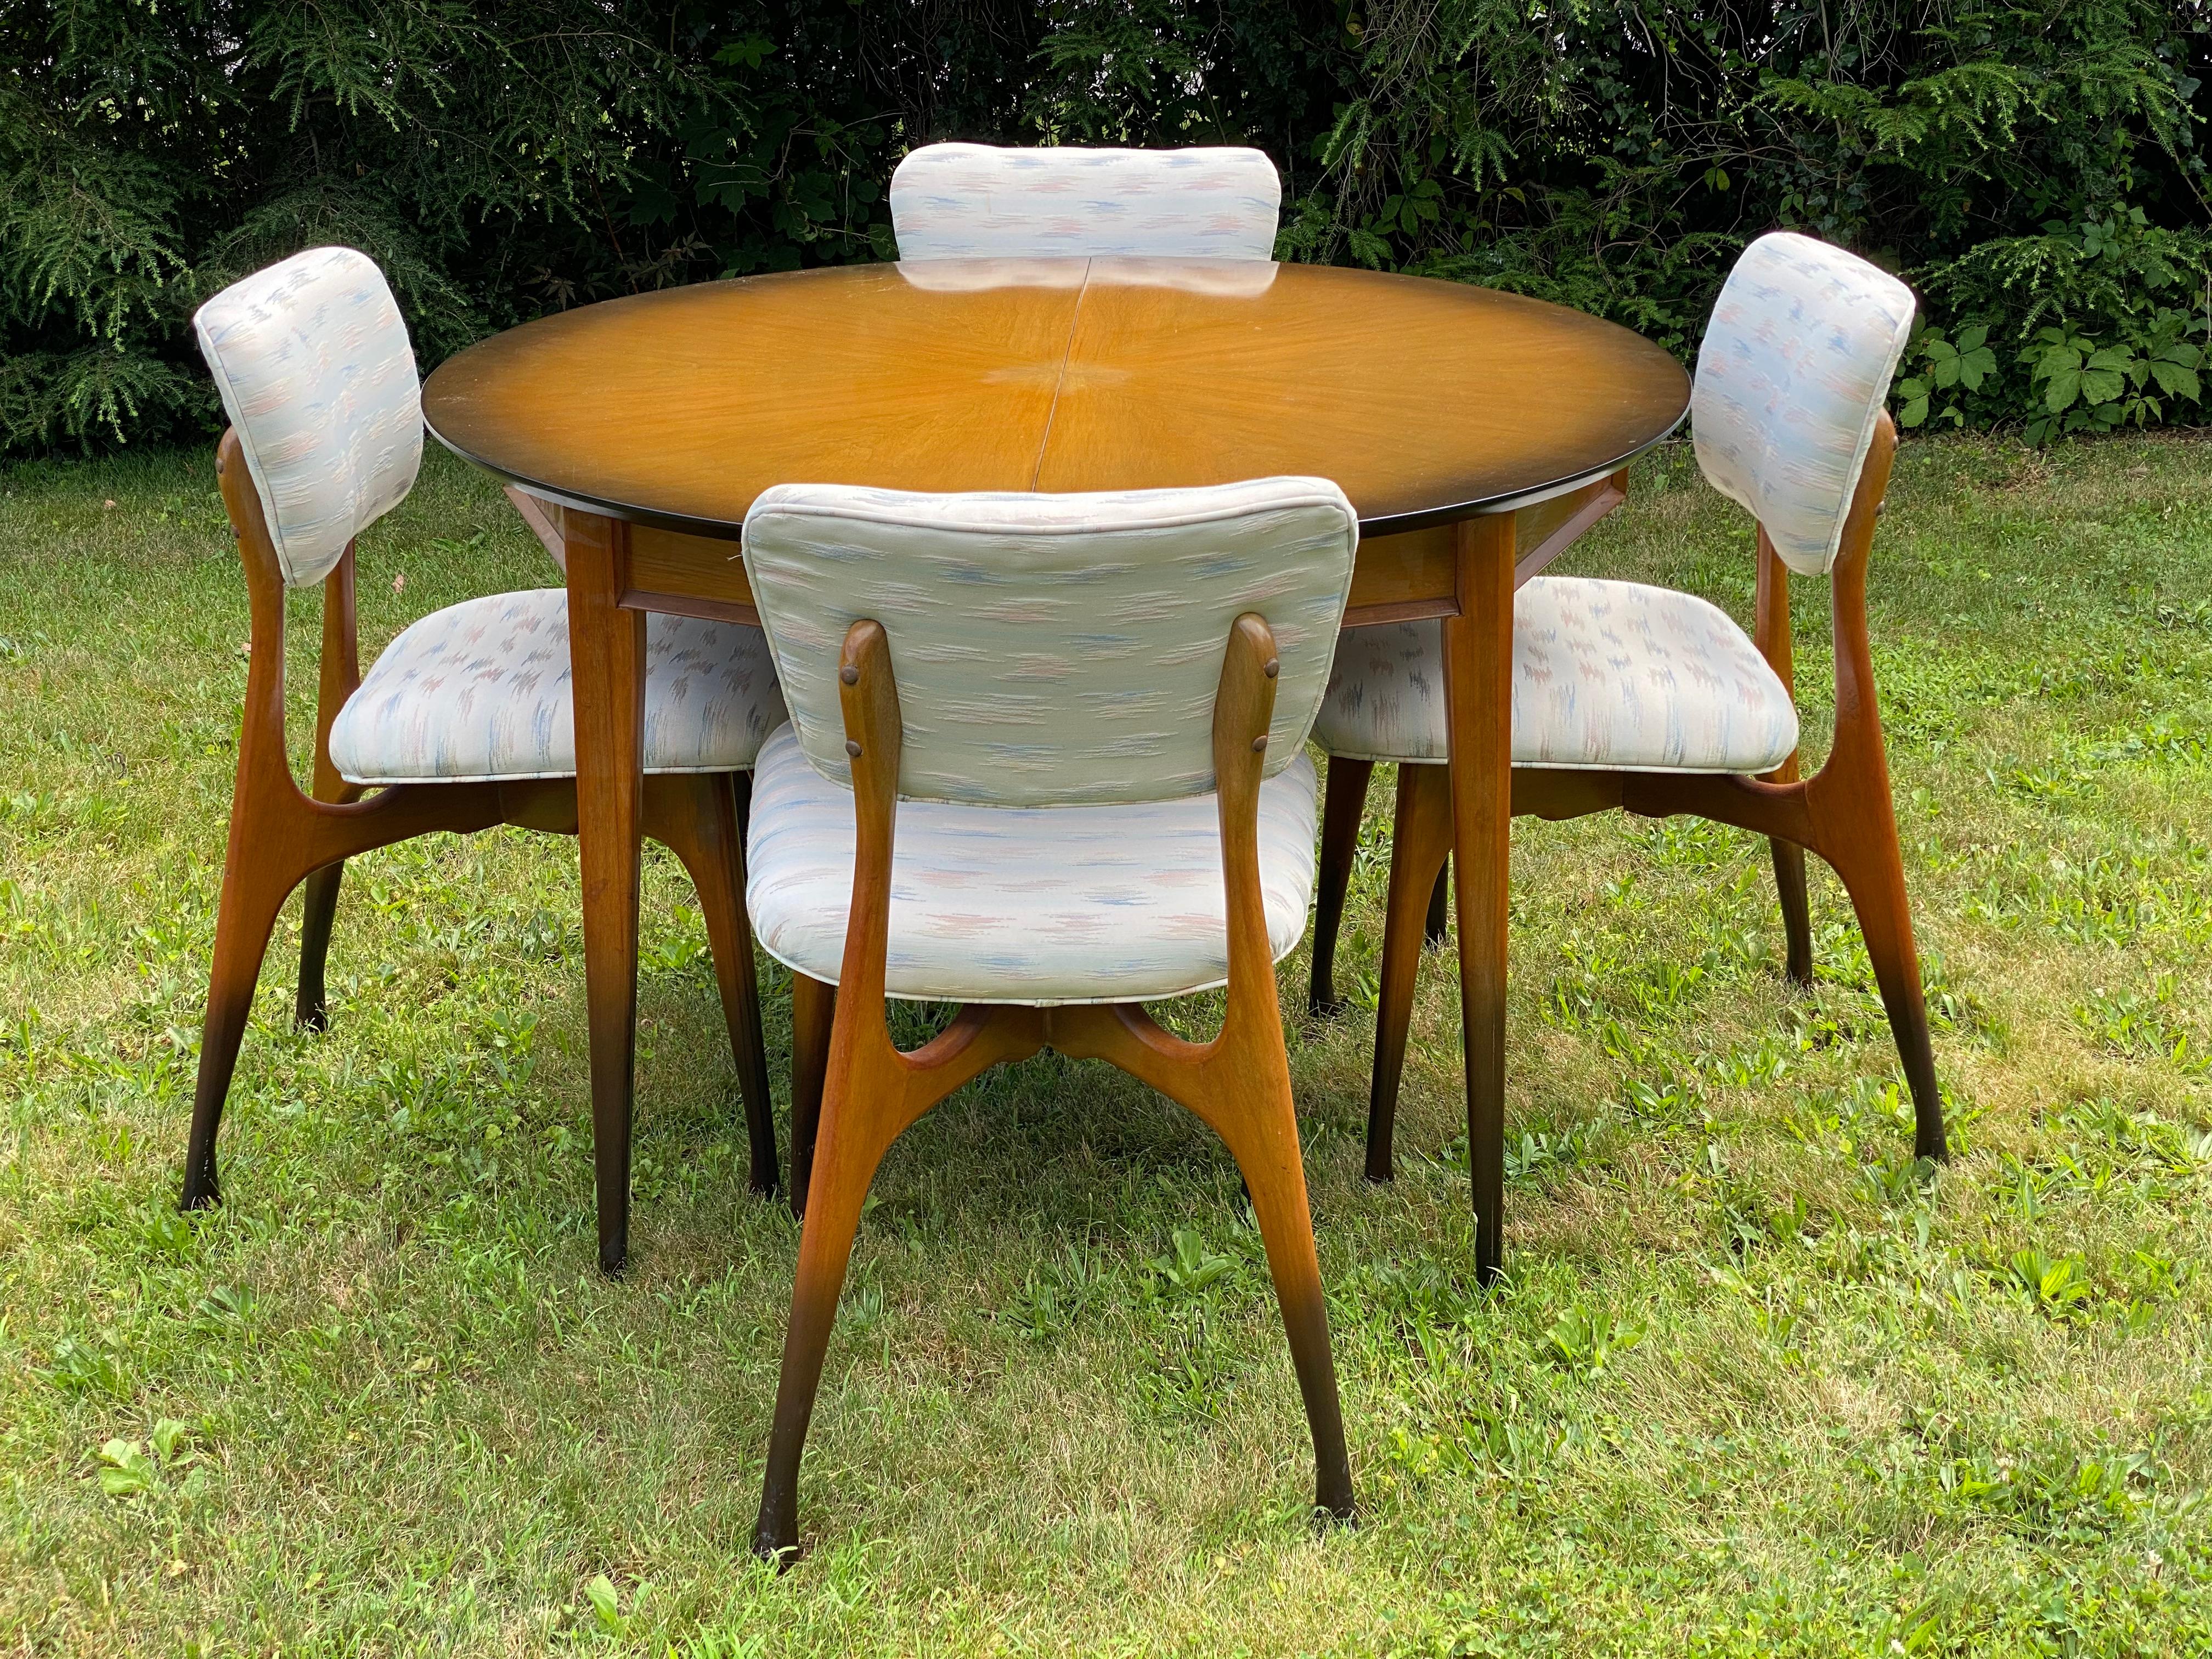 Extremely clean and well preserved dining table and chairs. Circa 1960. Featuring original sunburst finish on table and chairs. The four chairs were re-upholstered in the late 1980s. The chair frame is reminiscent of Shelby William's Gazelle chair